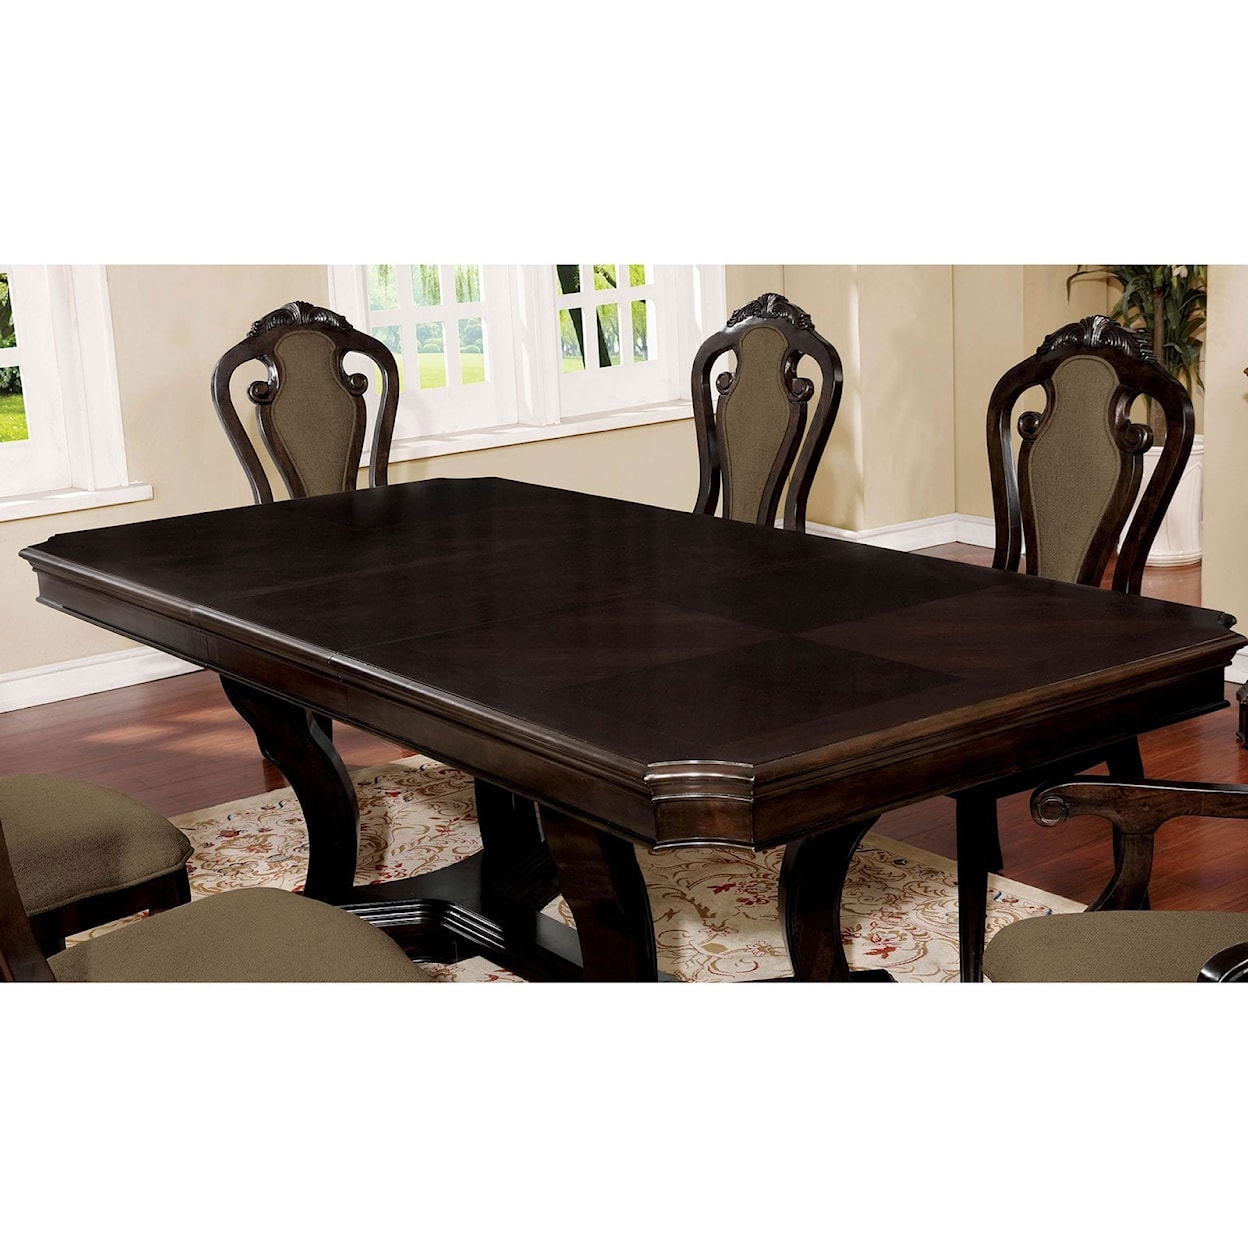 Furniture of America Rosalina Dining Table